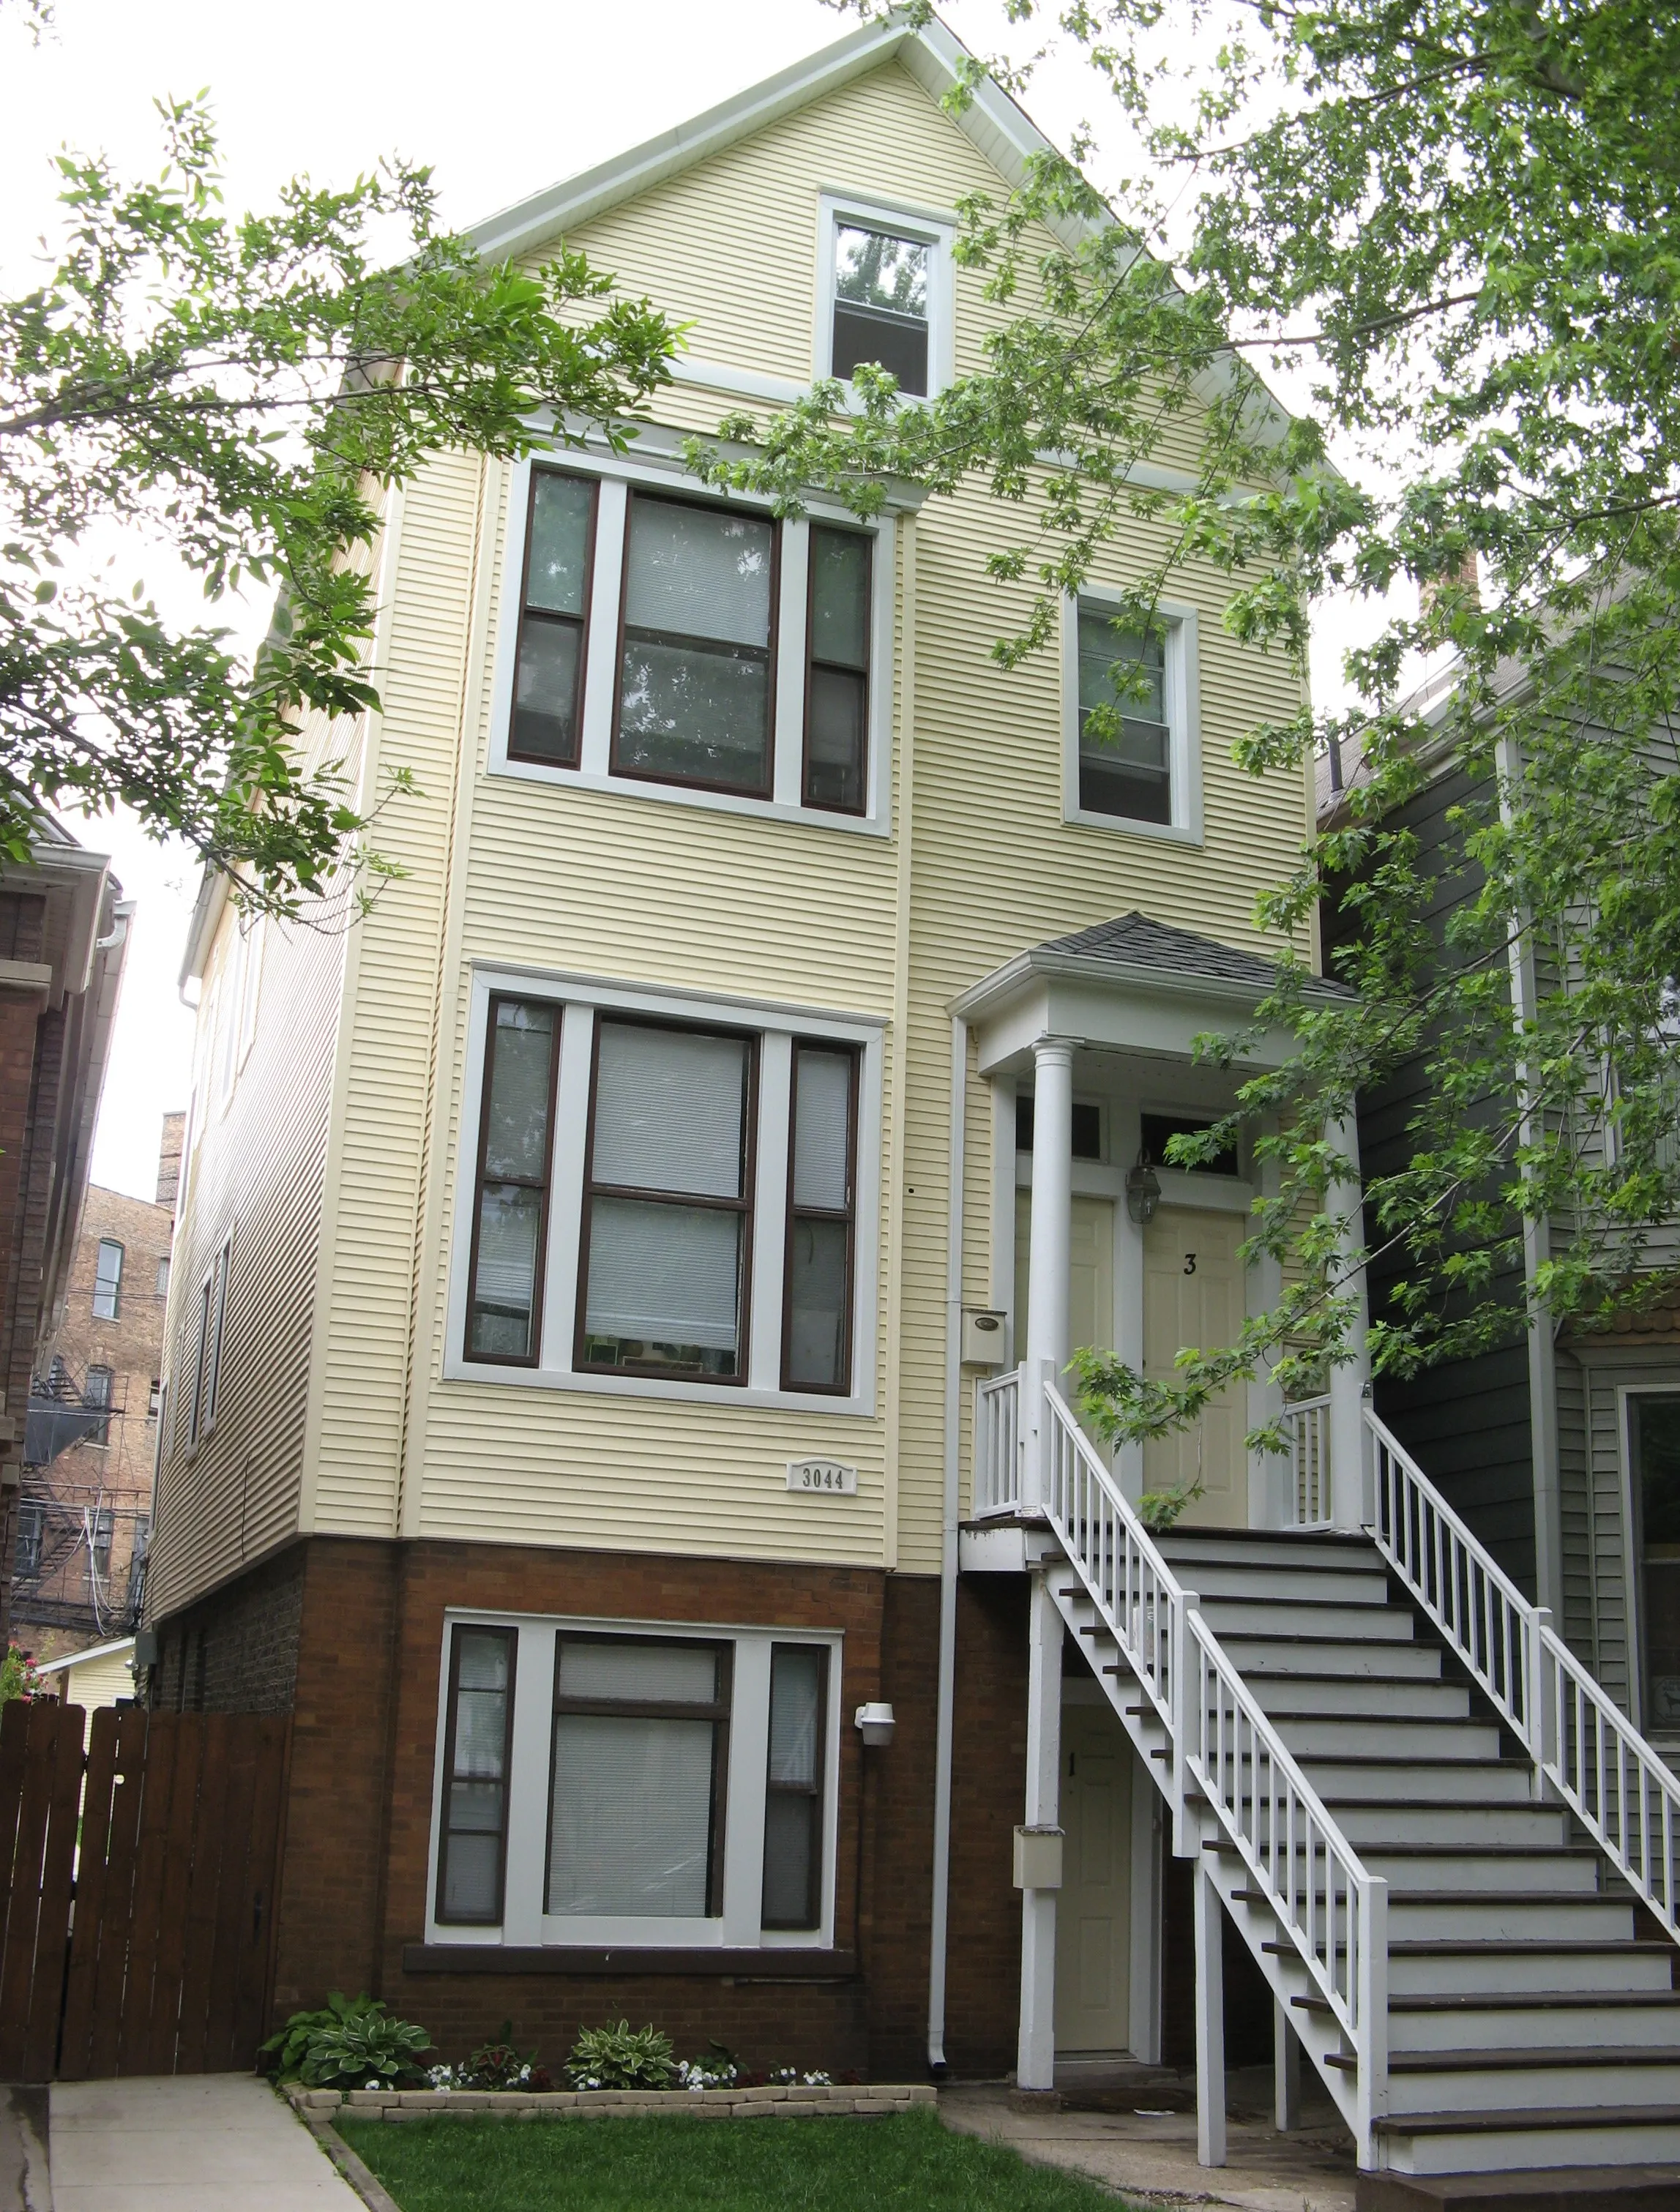 3044 N SOUTHPORT AVE 60657-unit#1-Chicago-IL